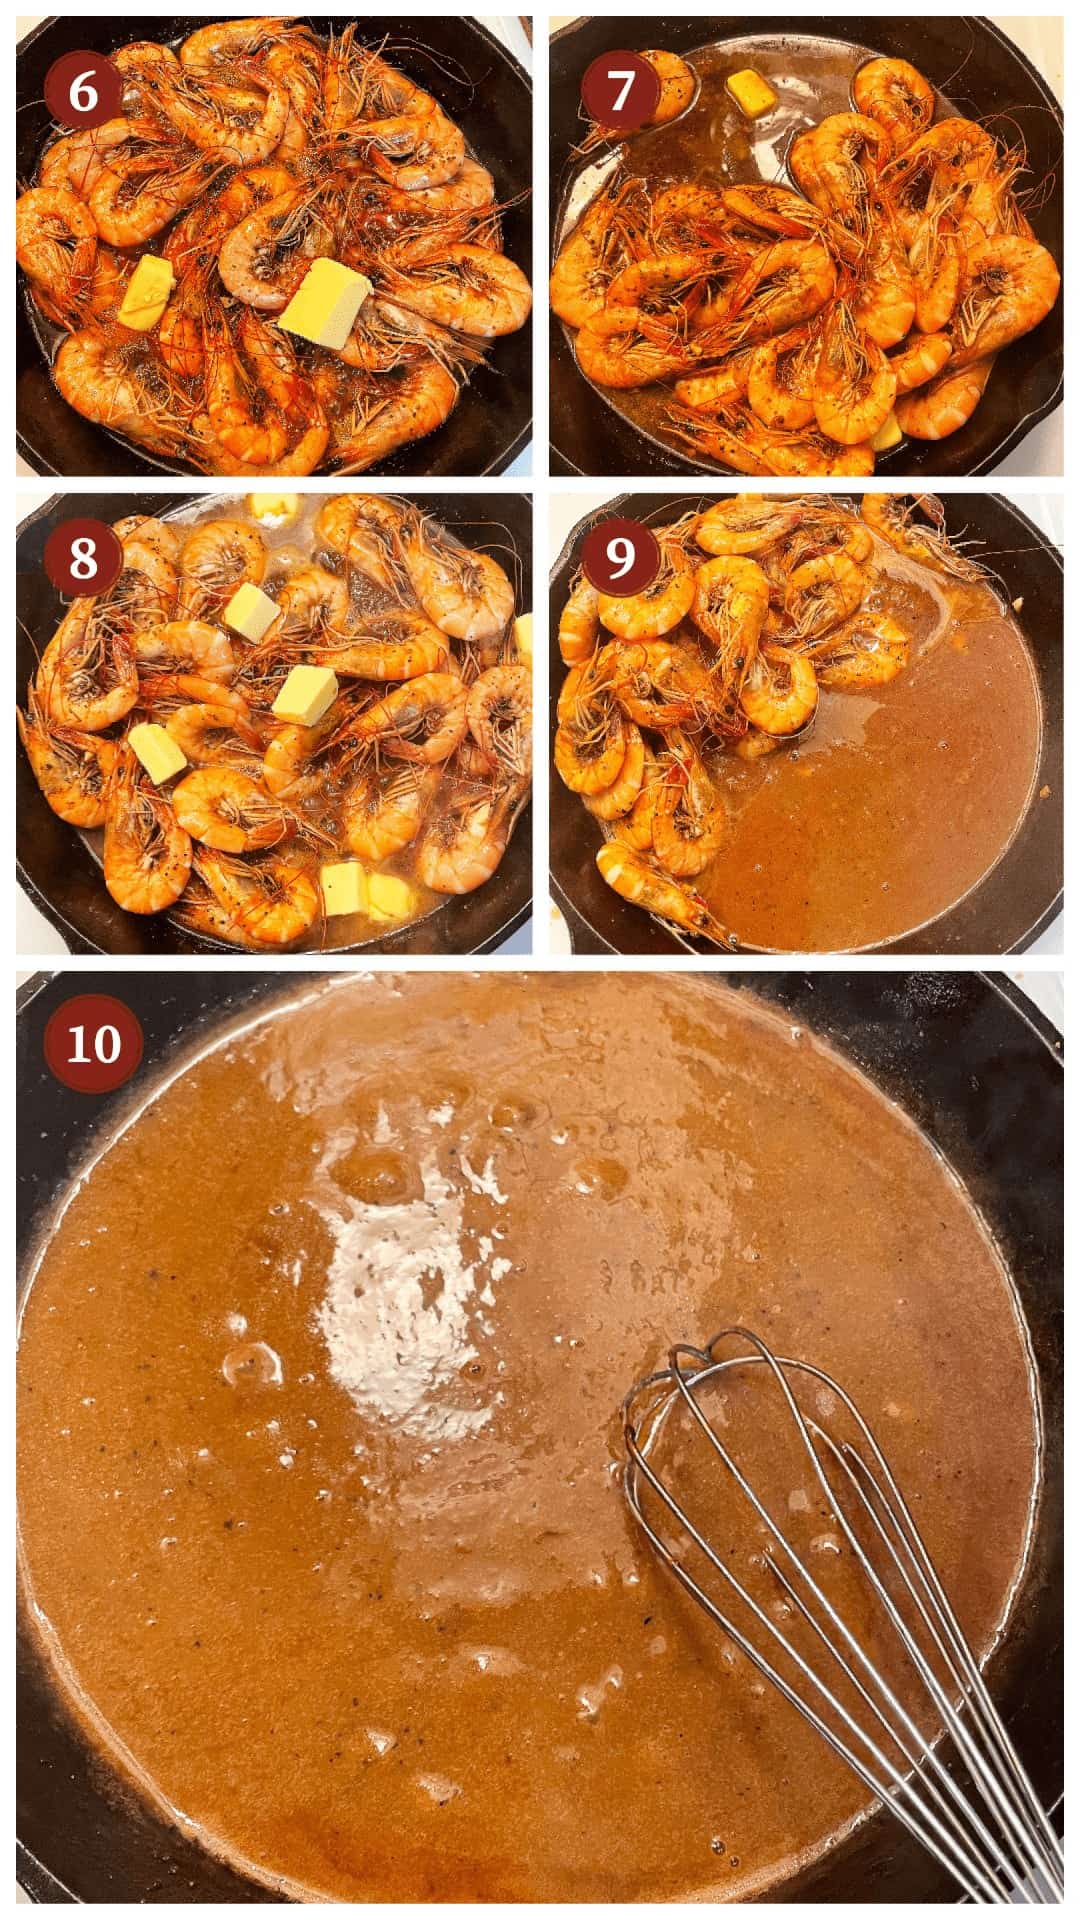 A collage of images showing how to make New Orleans BBQ Shrimp, steps 6-10.